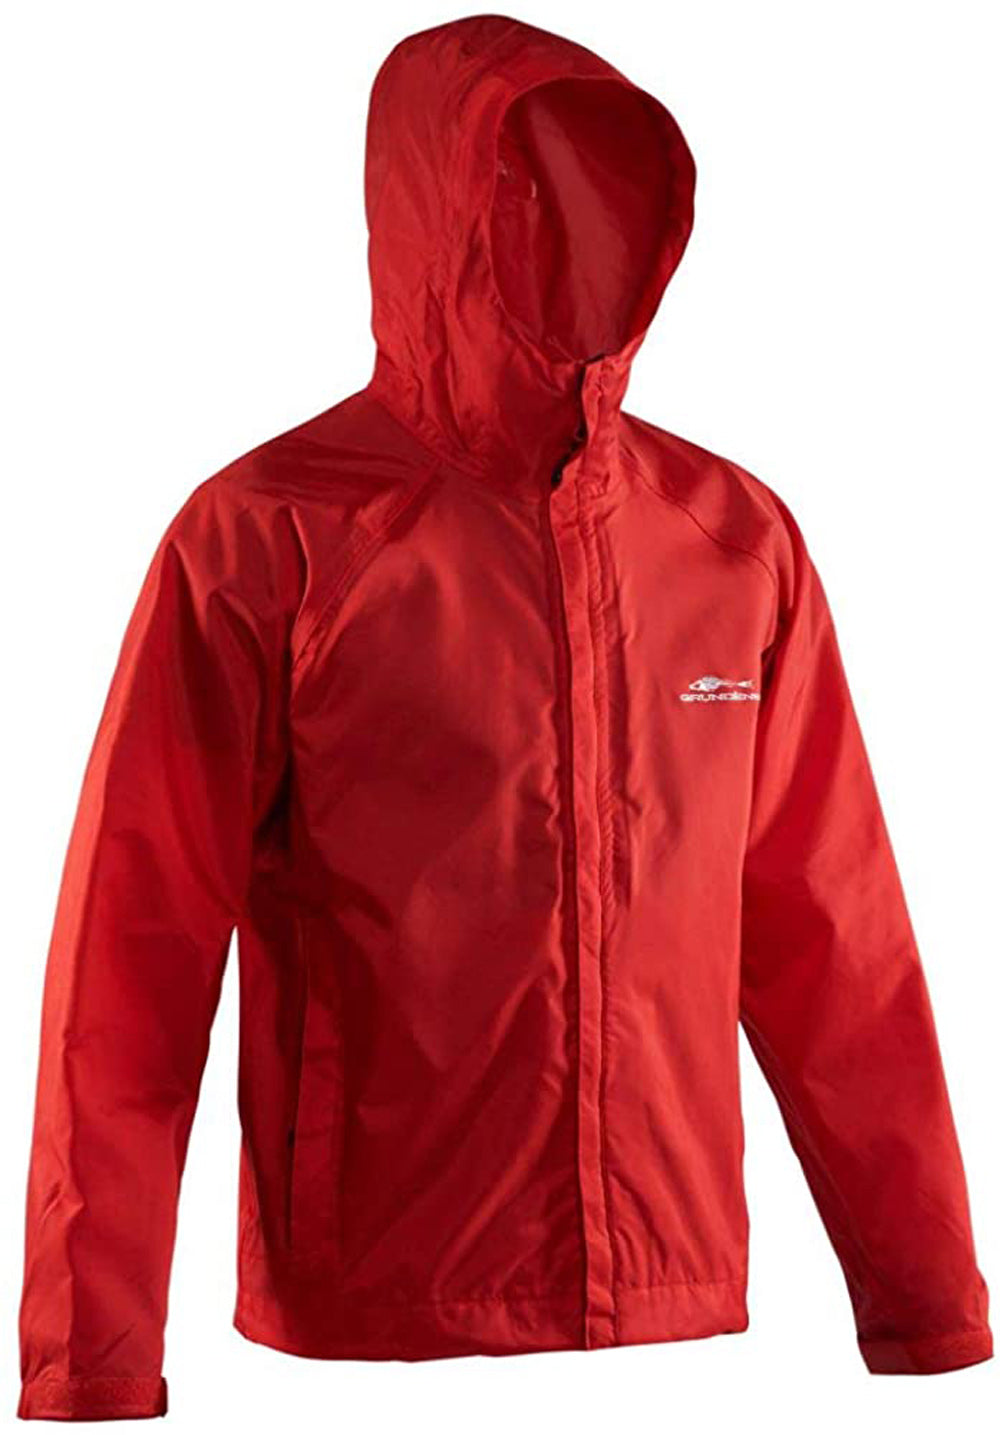 Weather Watch Jacket in Red color